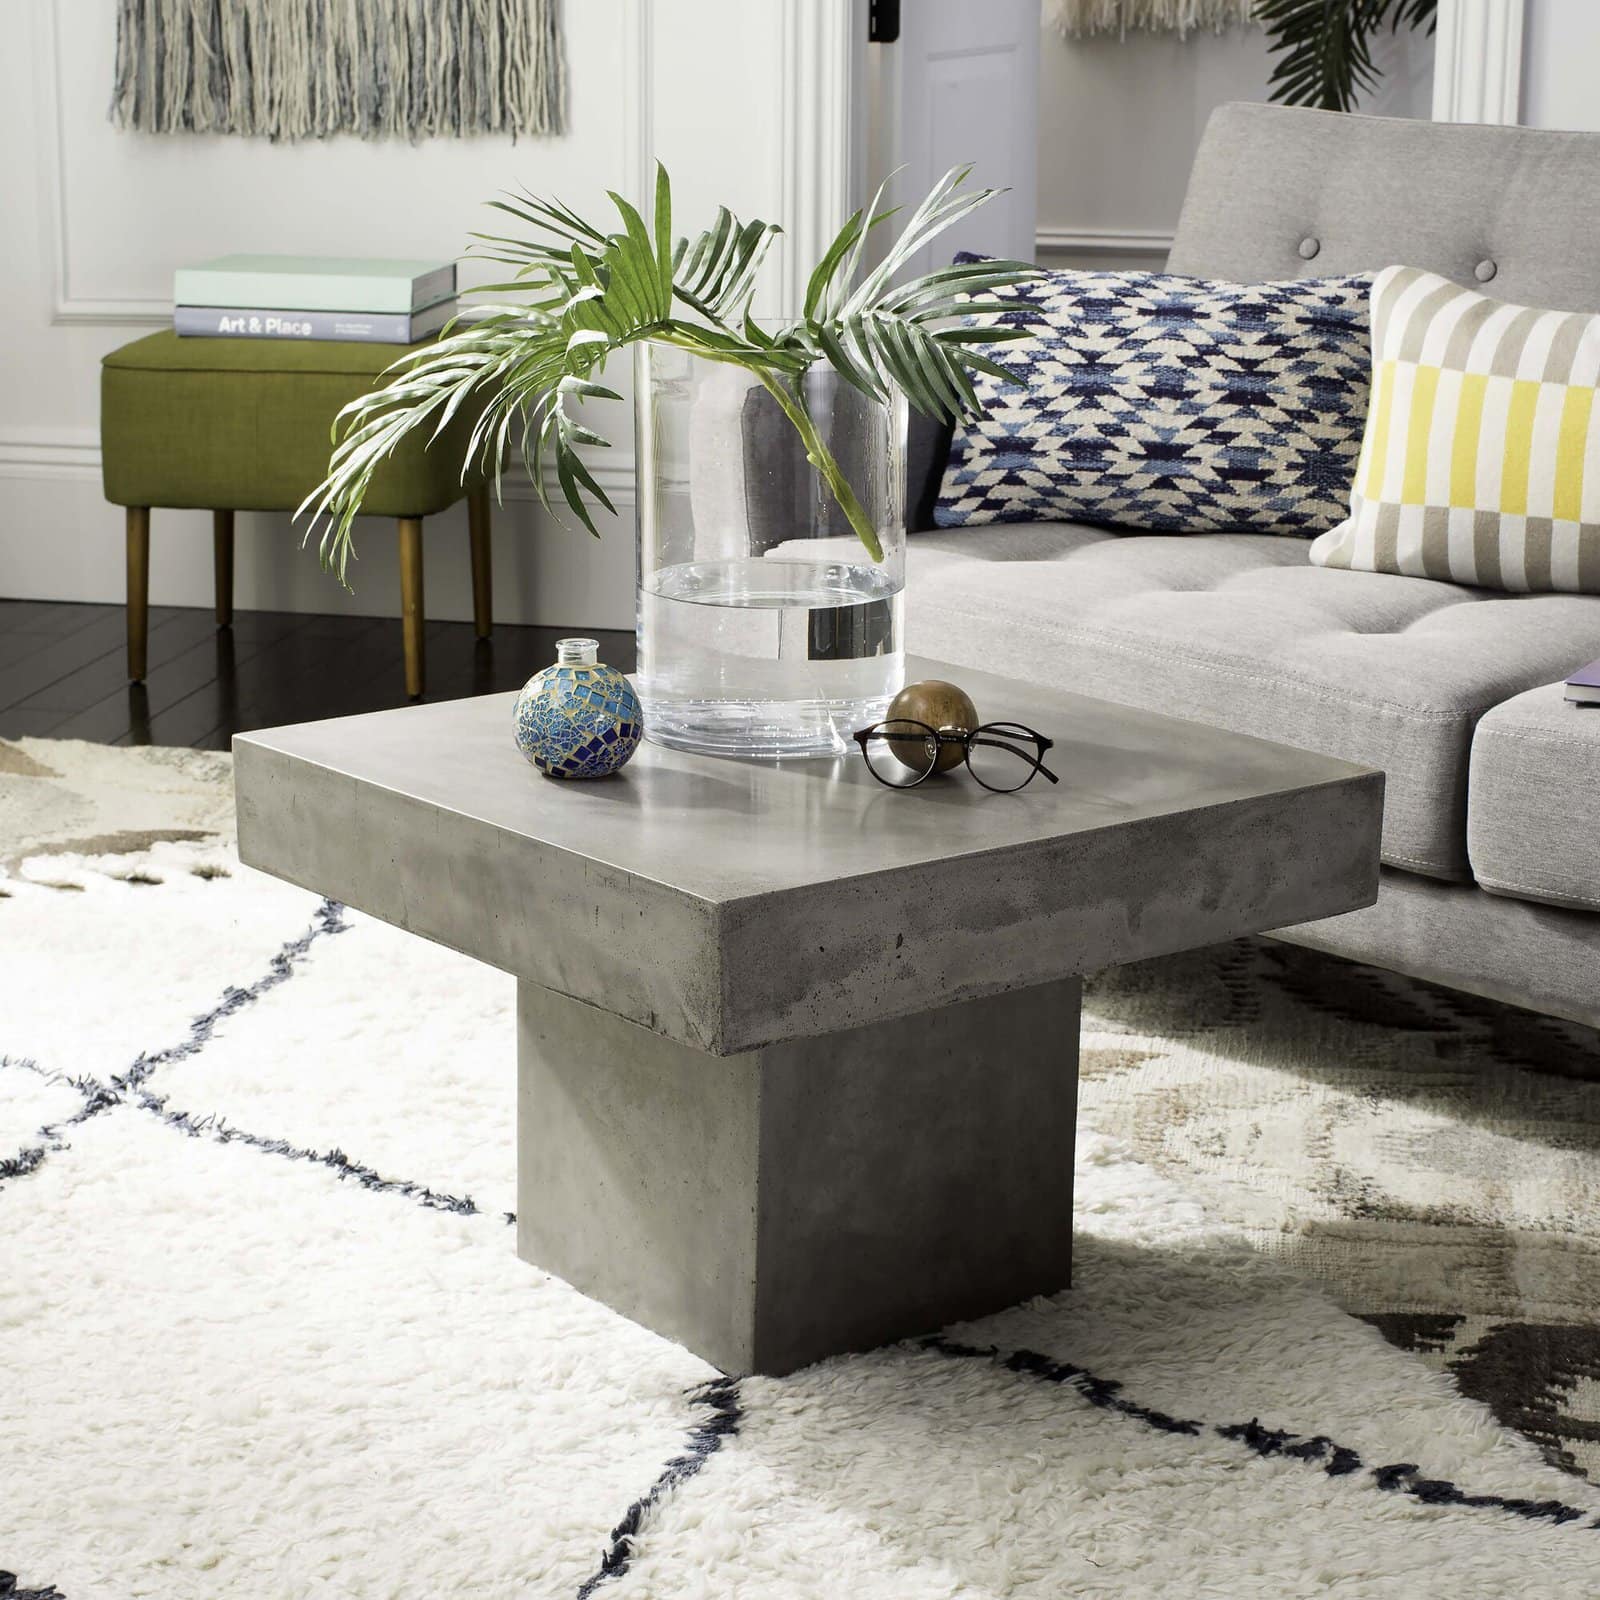 Go Ultra Modern with a Concrete Table